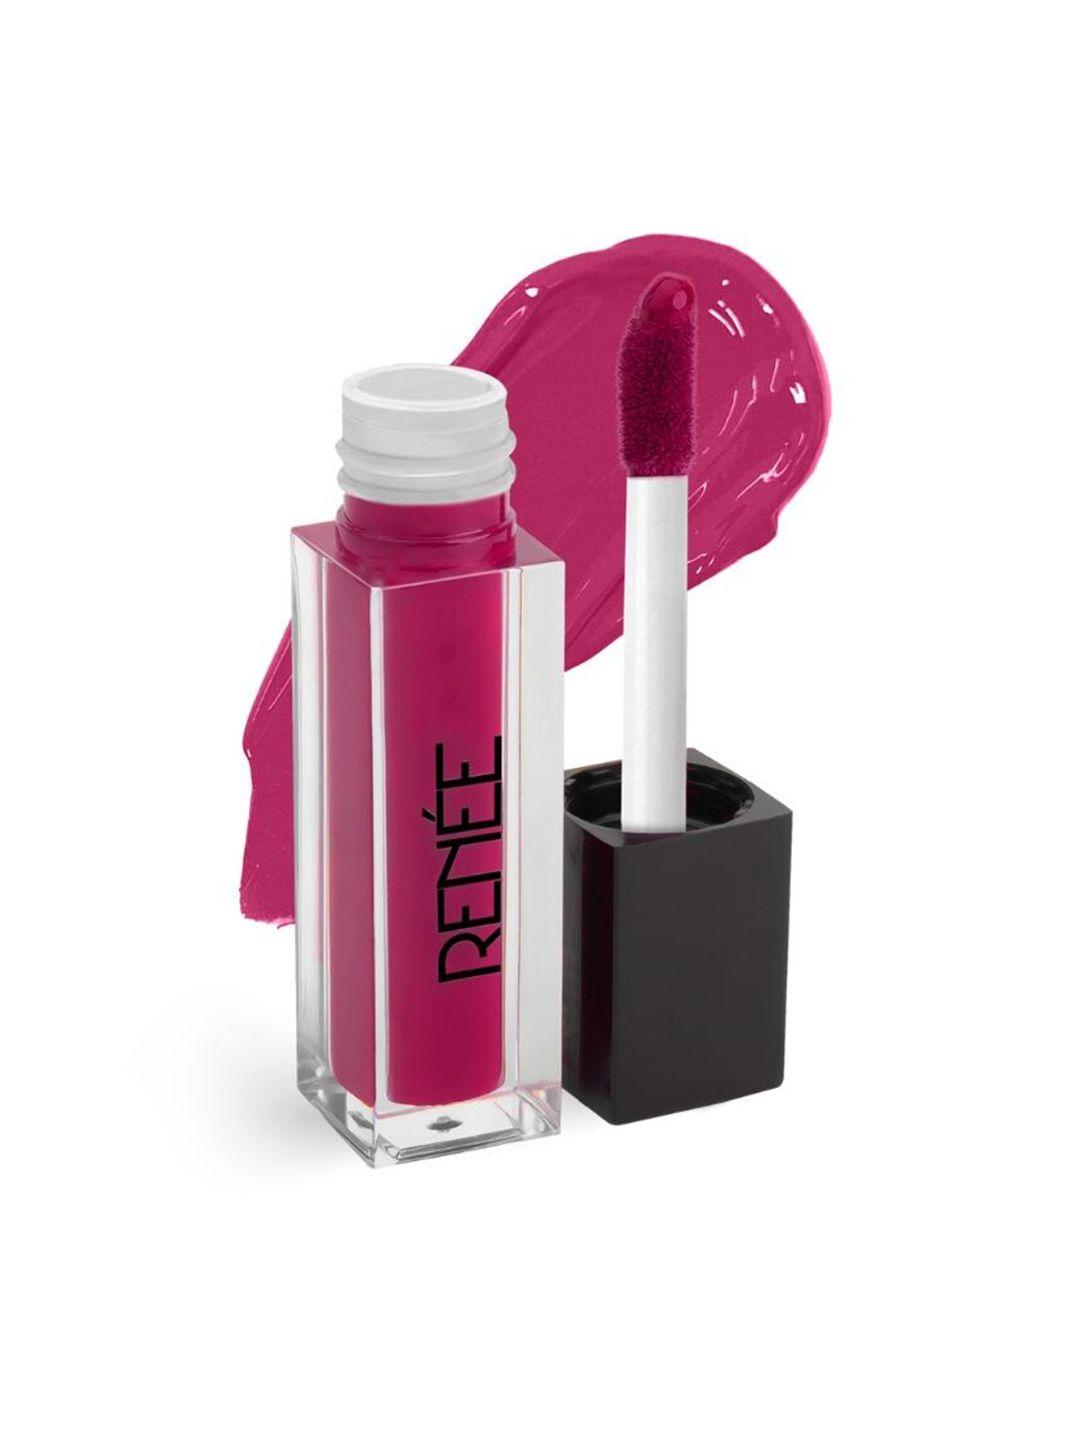 renee stay with me mini matte smudge-proof long lasting lip color 2 ml - pride of magenta